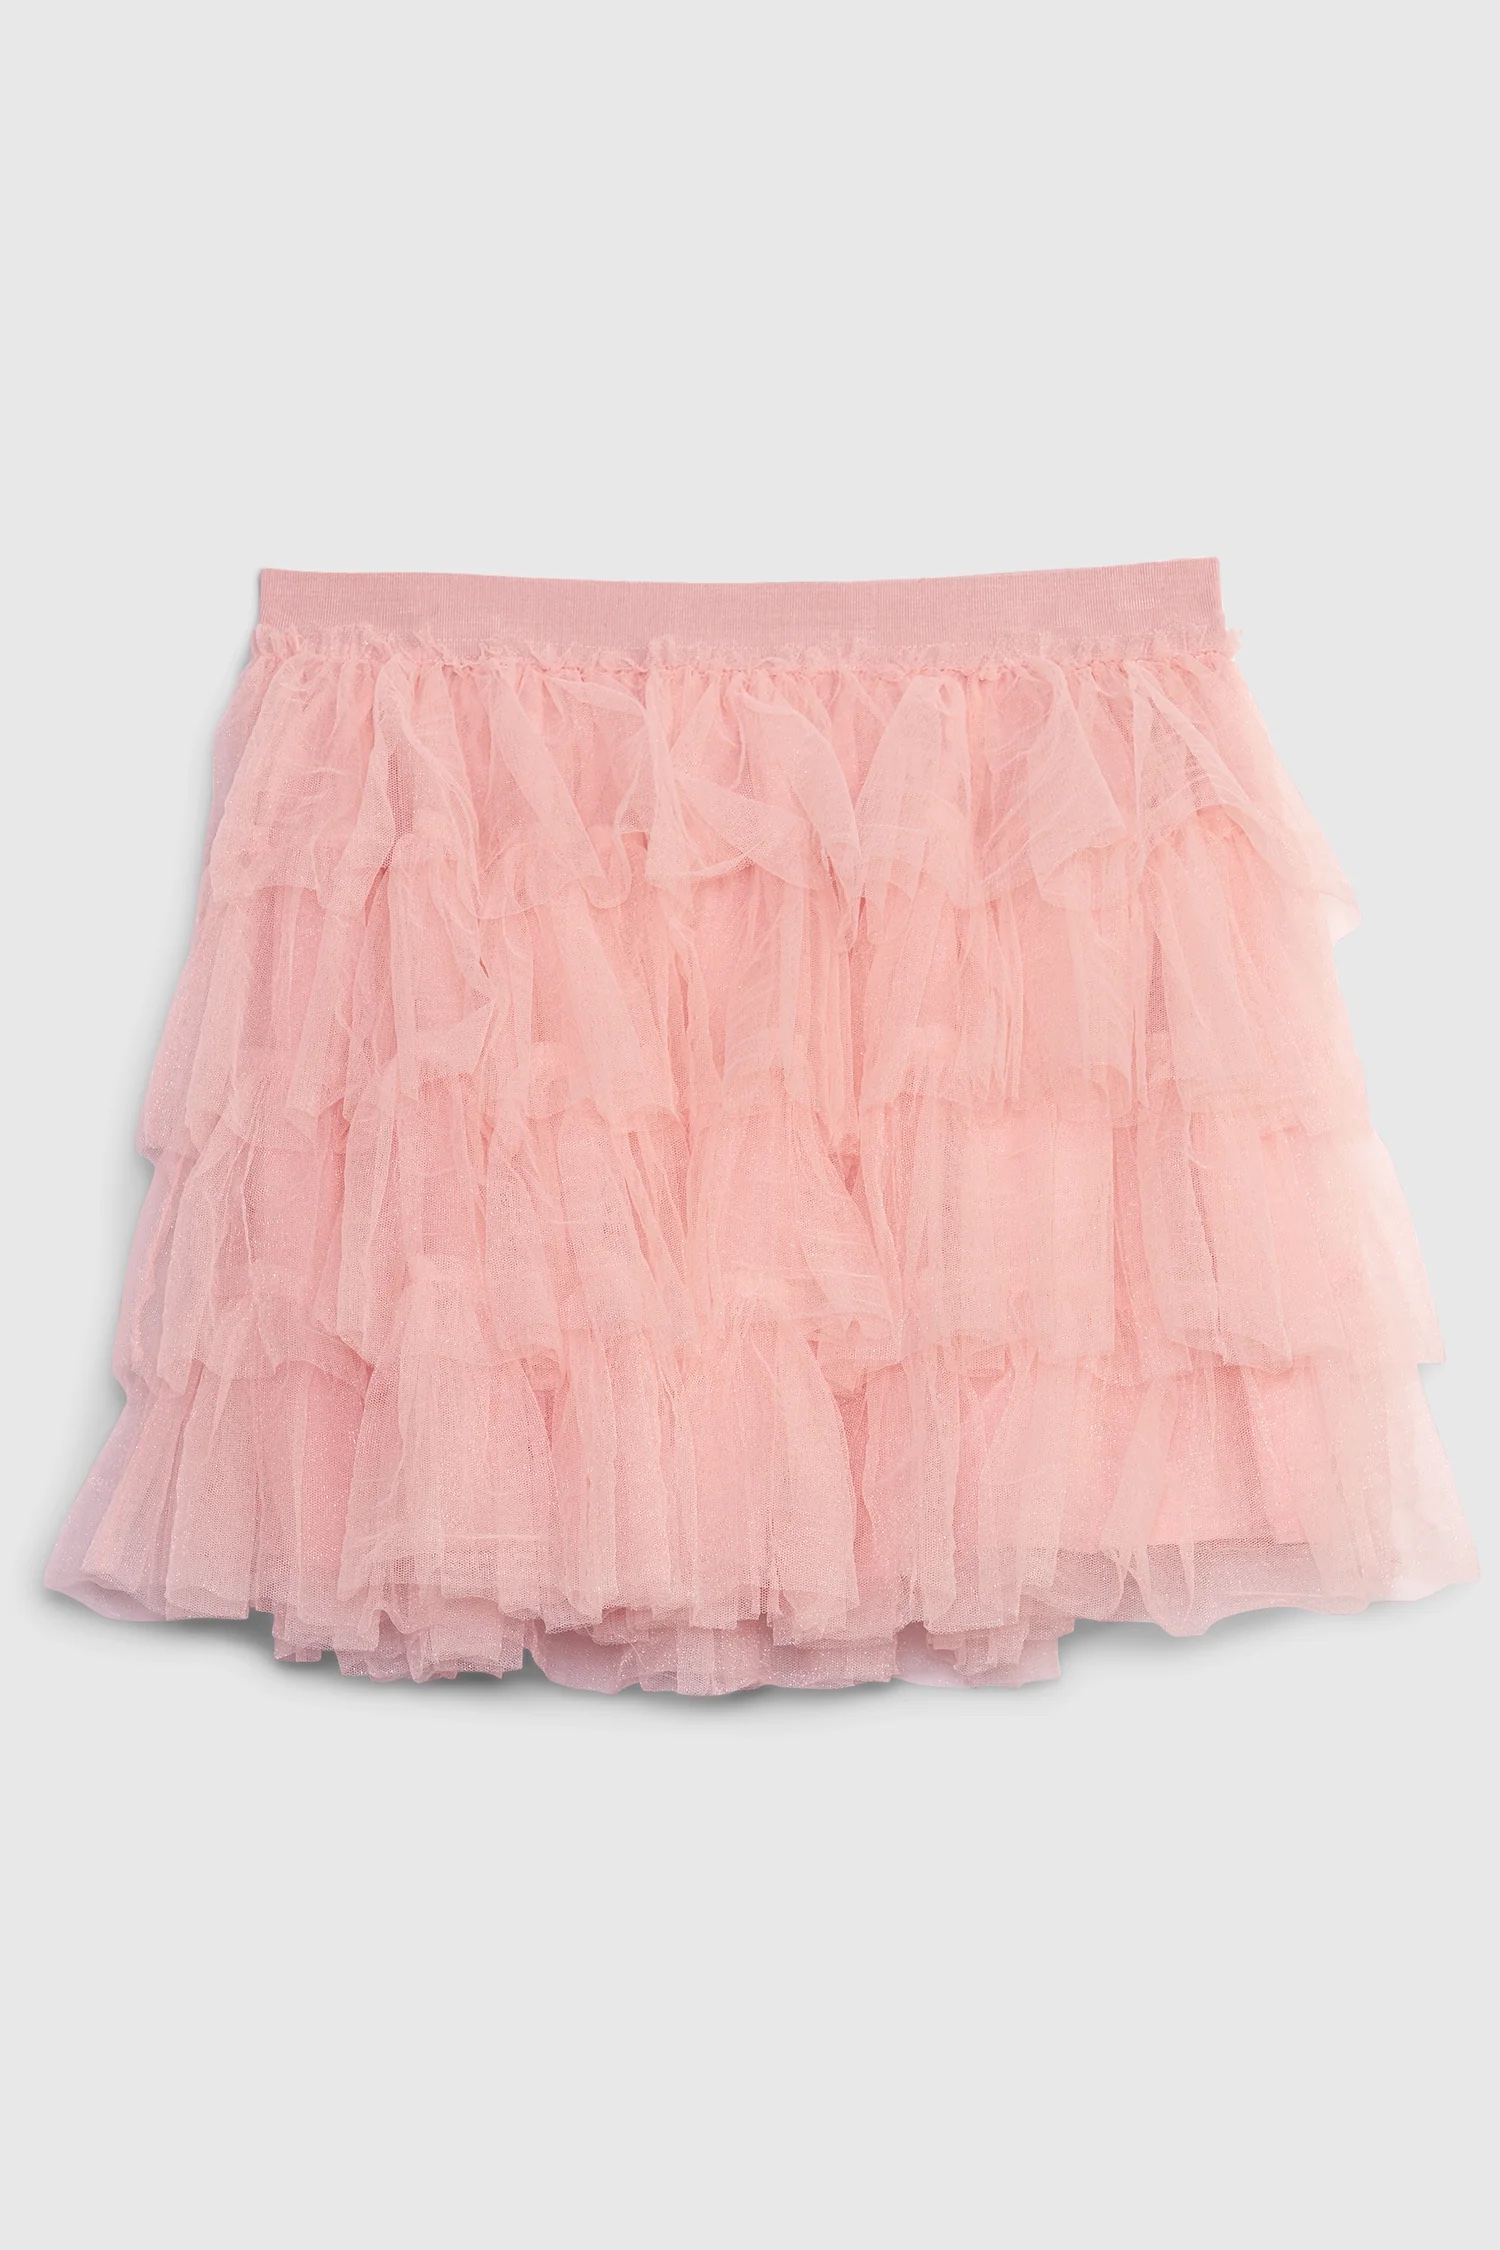 a pink tulle skirt